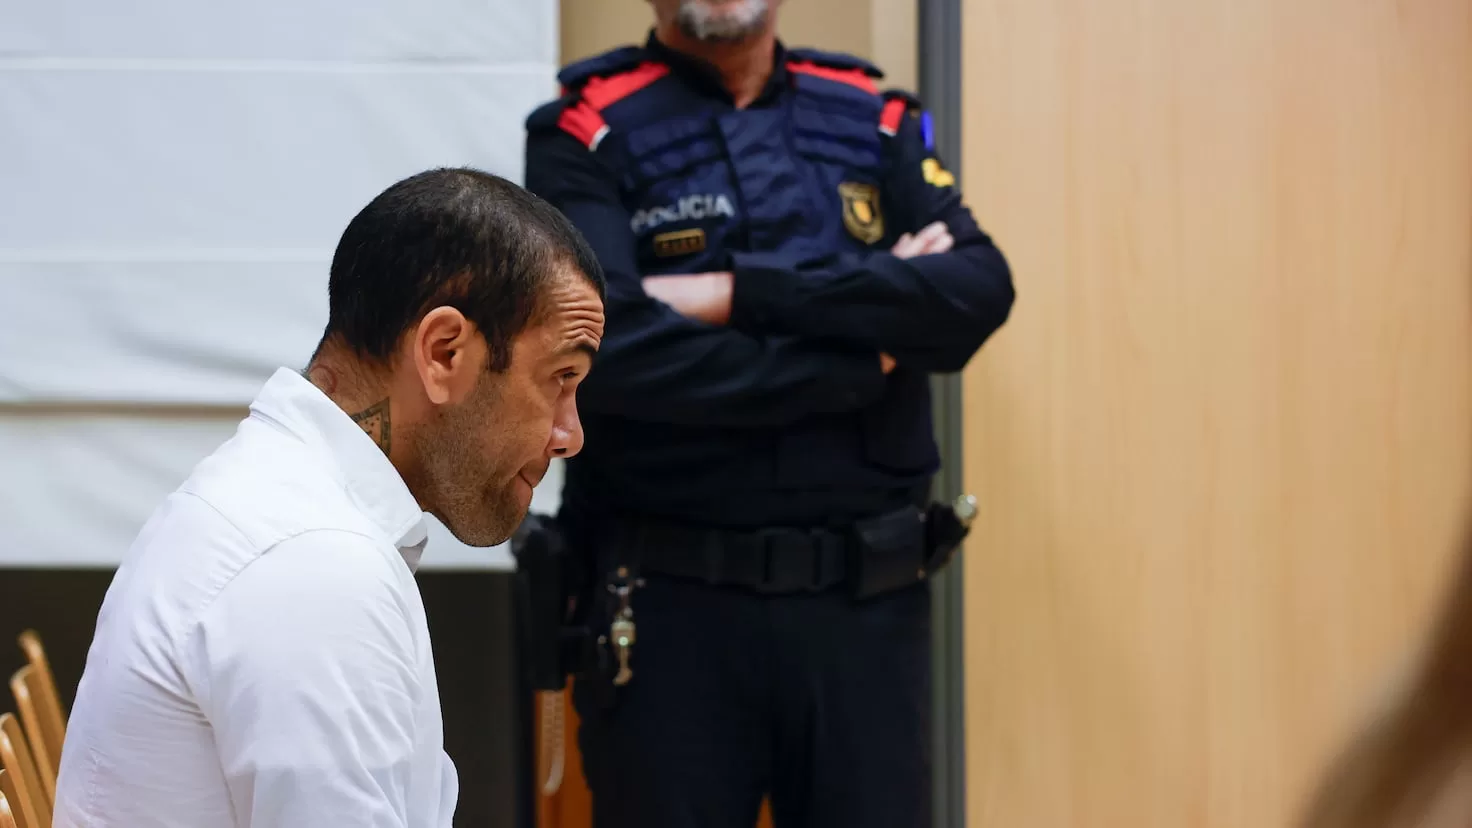 The Prosecutor rejects Alves's release on bail
